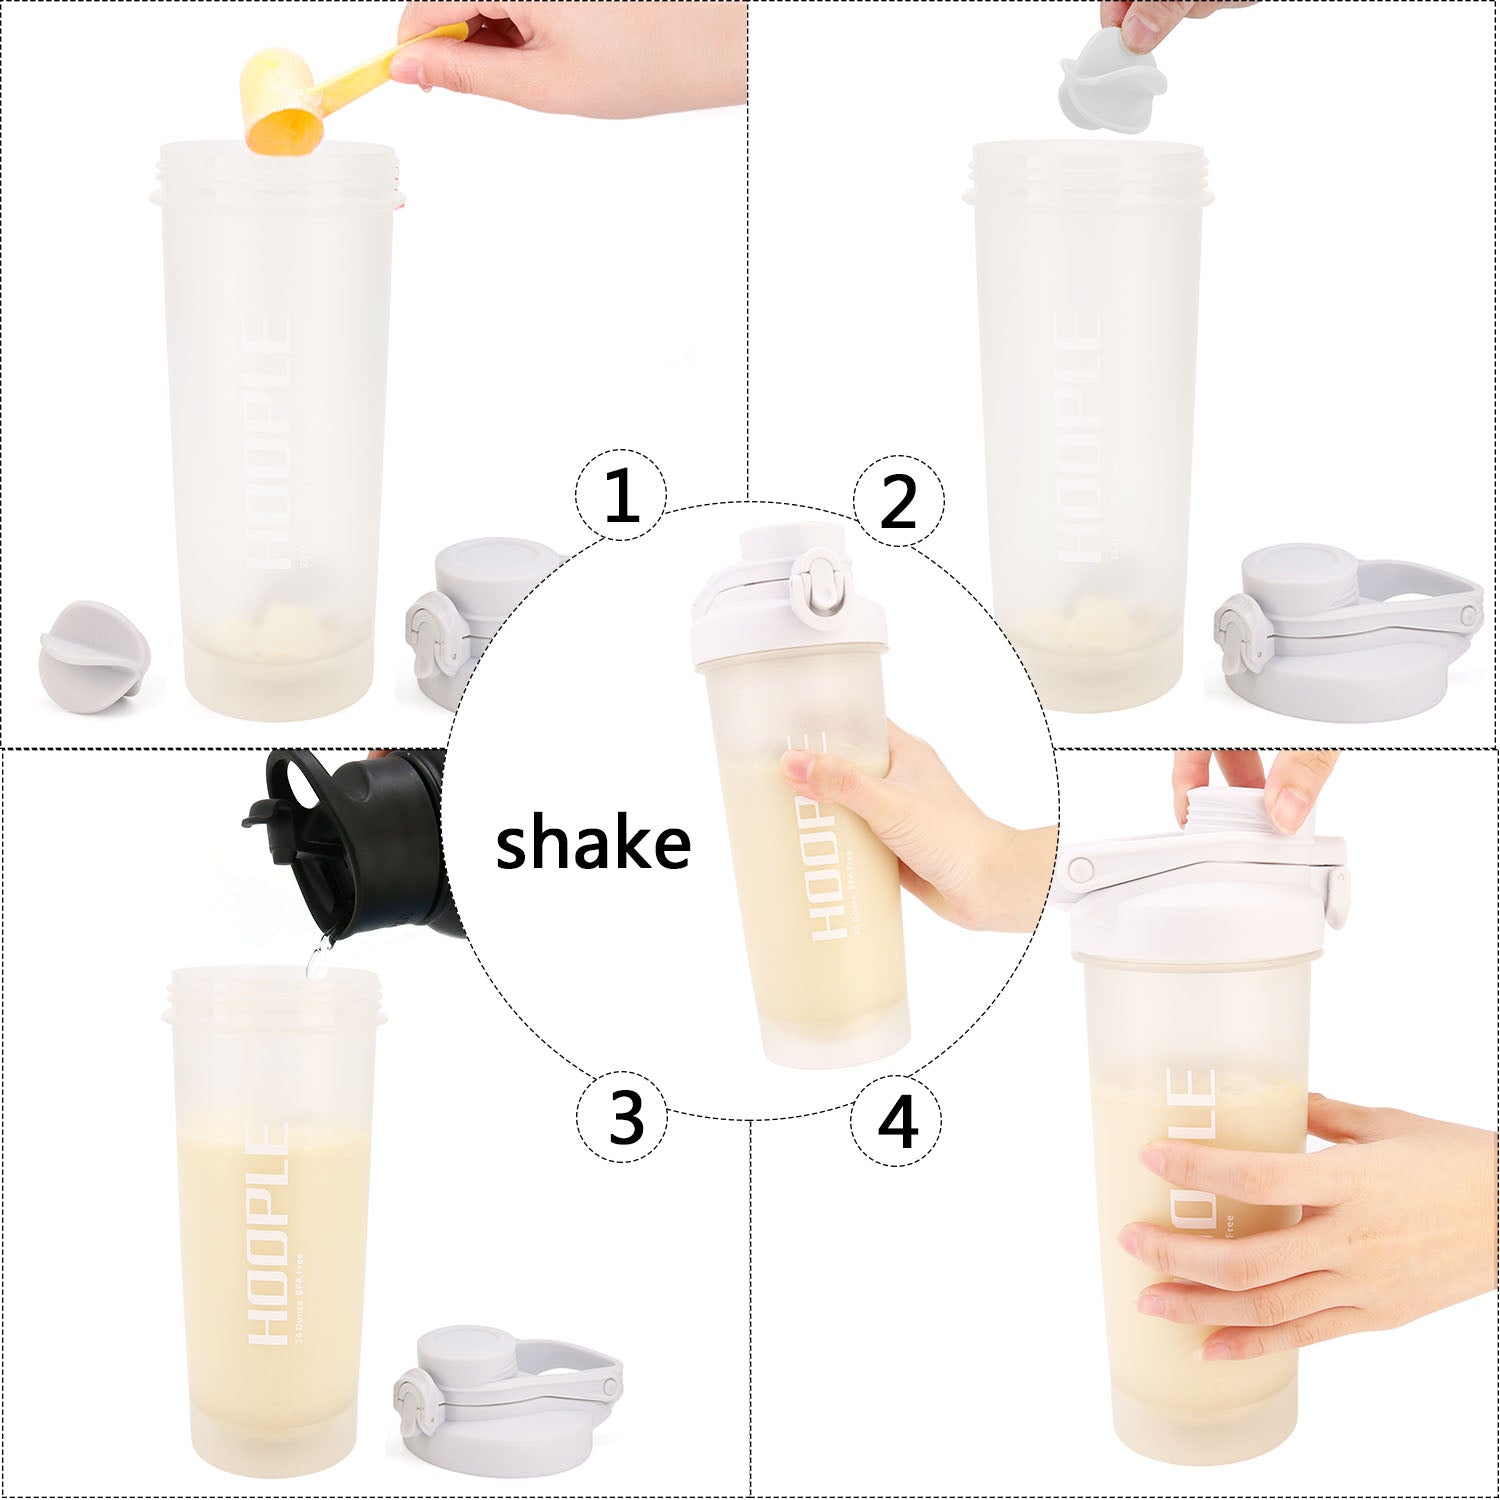 24 oz Shake Bottle Flip Top Spout with Lid Lock New Mixer Ball to Mix Protein Powder Easy Shaker Water Bottle with Handle (24oz-red)